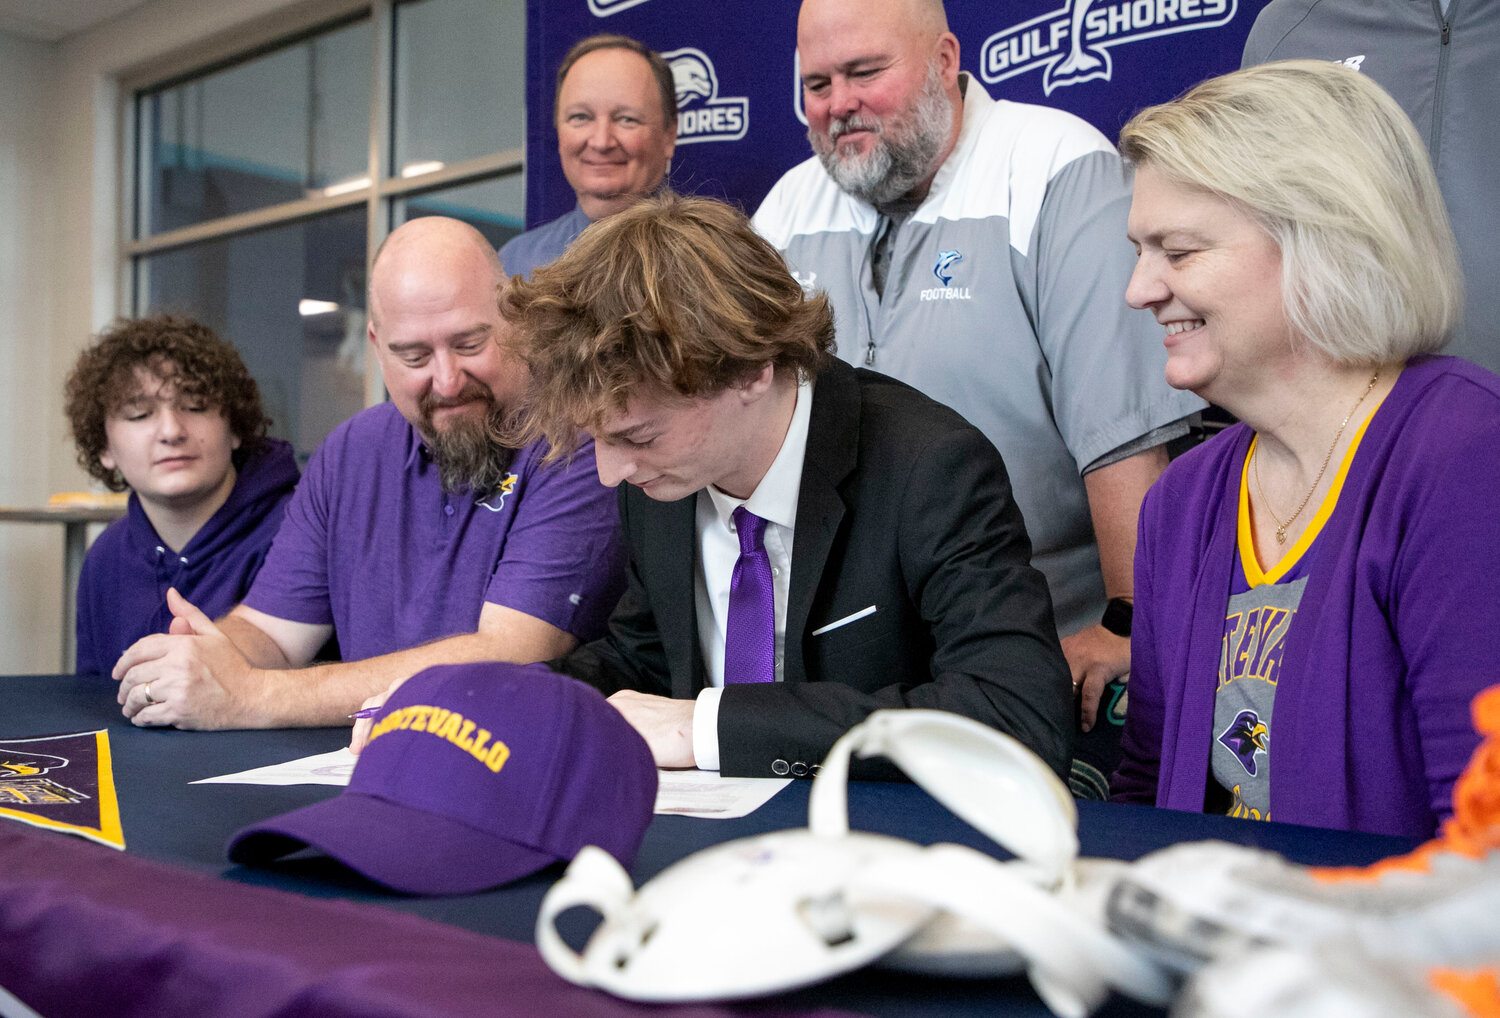 Gulf Shores senior Ethan Sharkey puts pen to paper on his National Letters of Intent to wrestle and run outdoor track for the Montevallo Falcons during a signing ceremony at the high school on Wednesday, Jan. 24. A three-sport athlete for the Dolphins, Sharkey looked forward to his next challenge of playing multiple sports at the collegiate level.